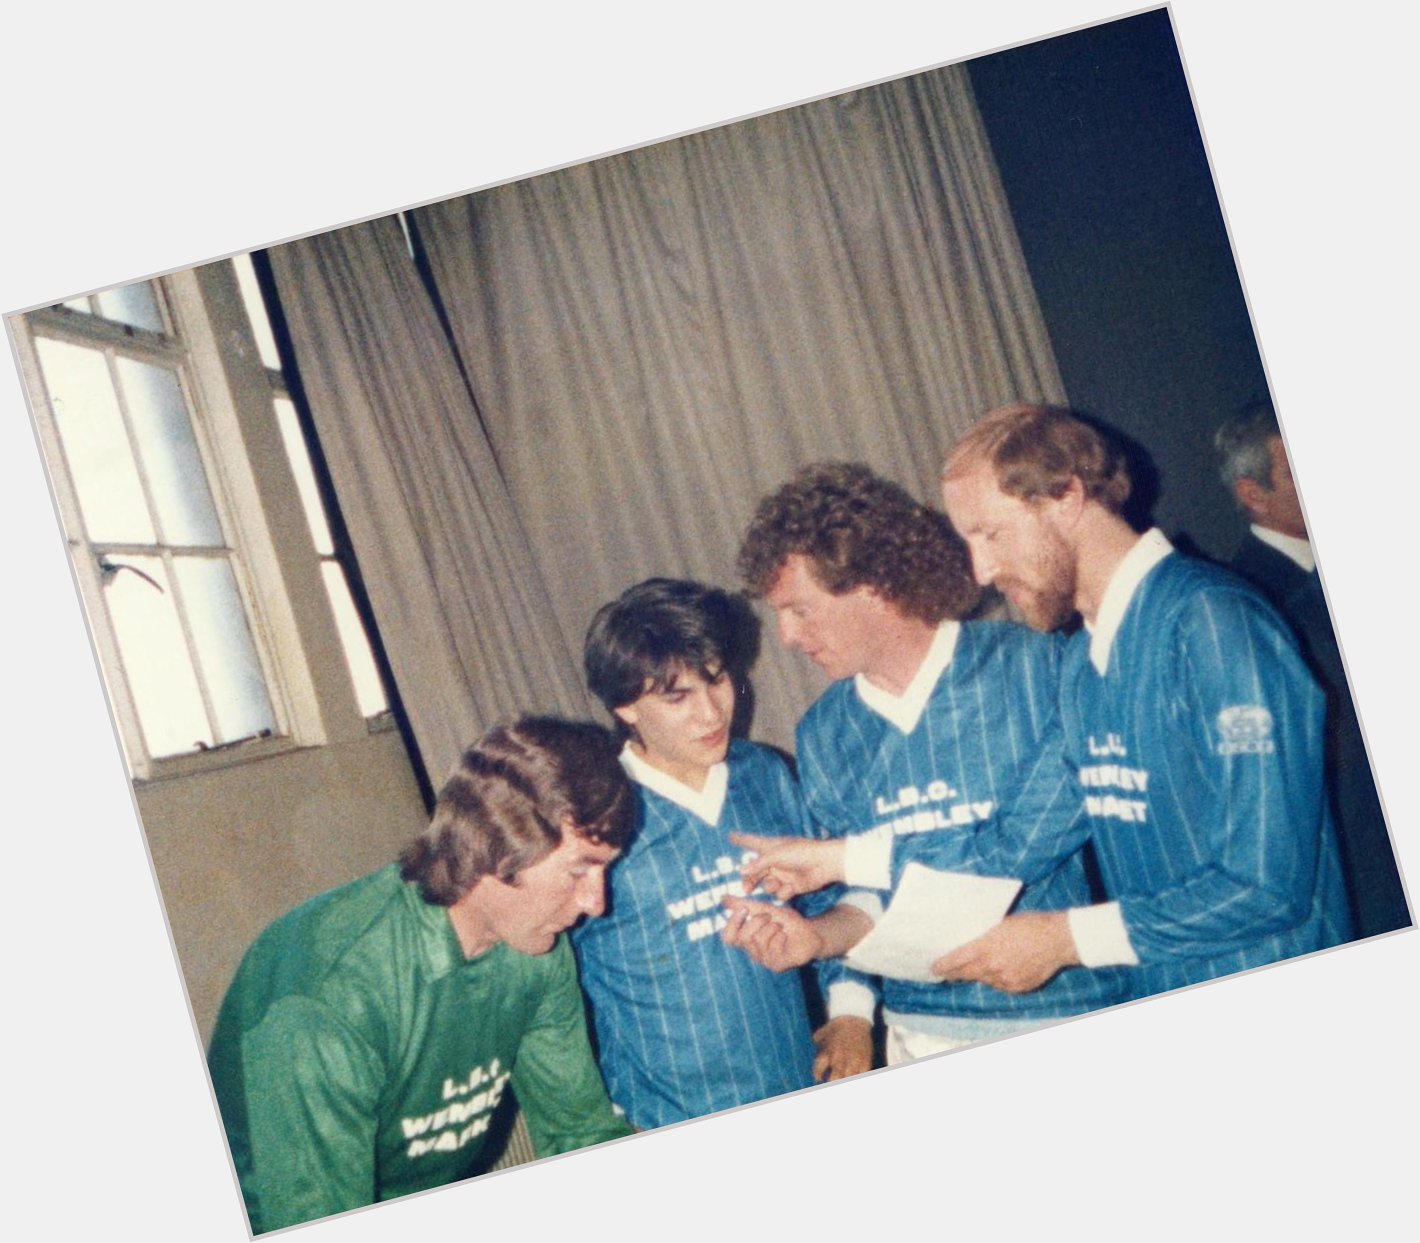 Happy 70th Birthday Pat Jennings. Pics show him with George Best + (in other pic) me, Rix and  